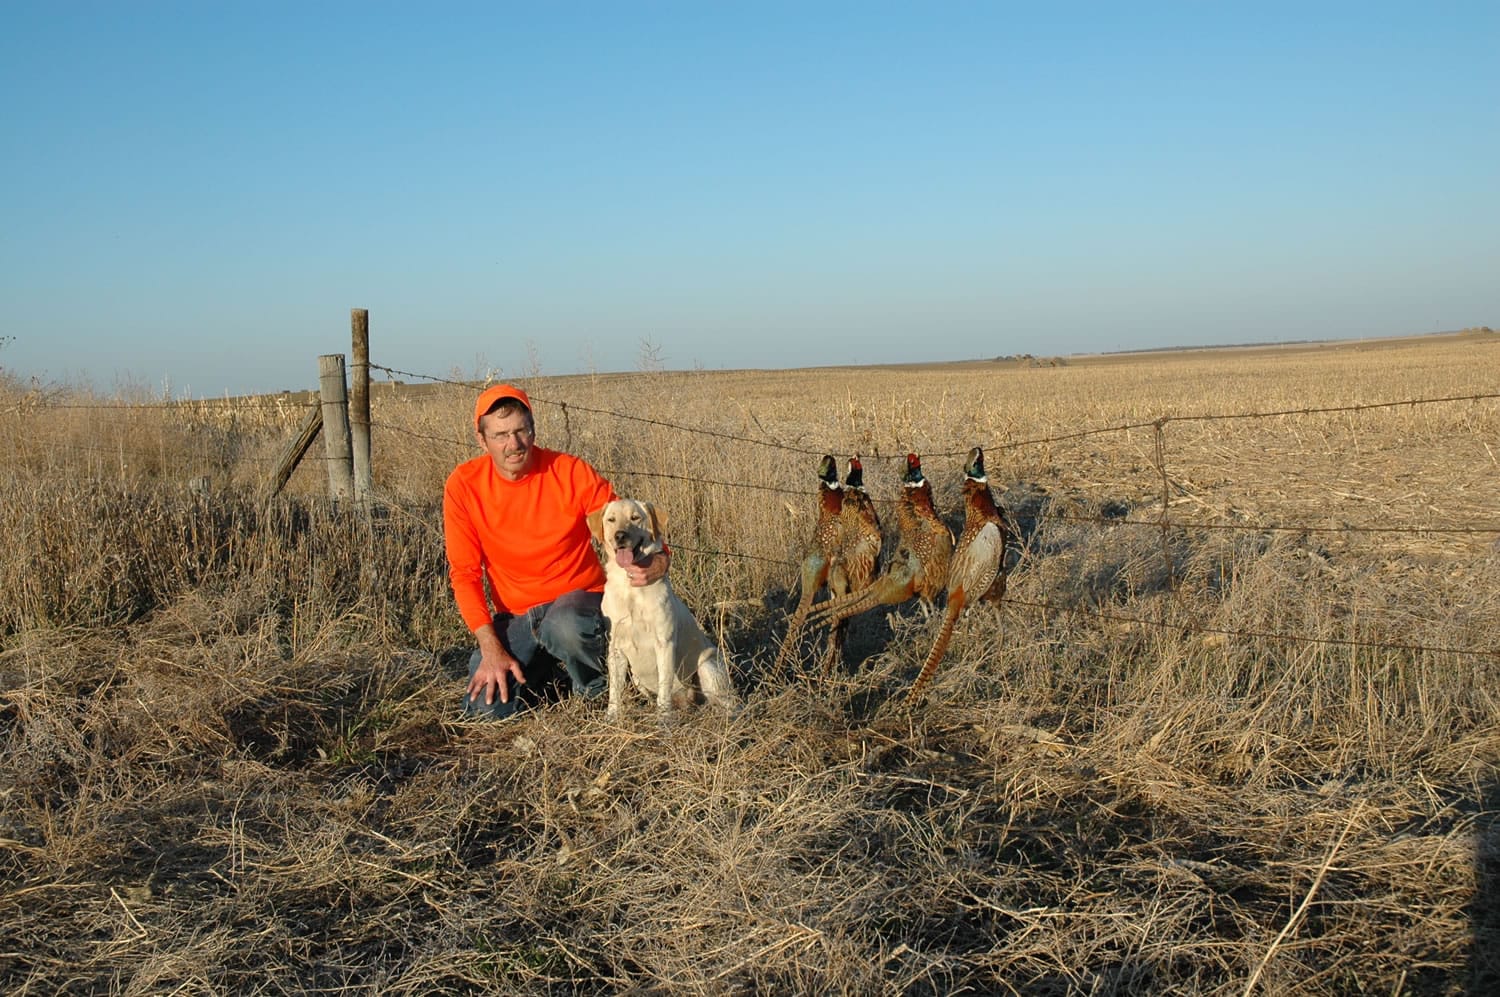 Pheasant hunting in Eastern Washington has fallen on hard times since these roosters were shot.